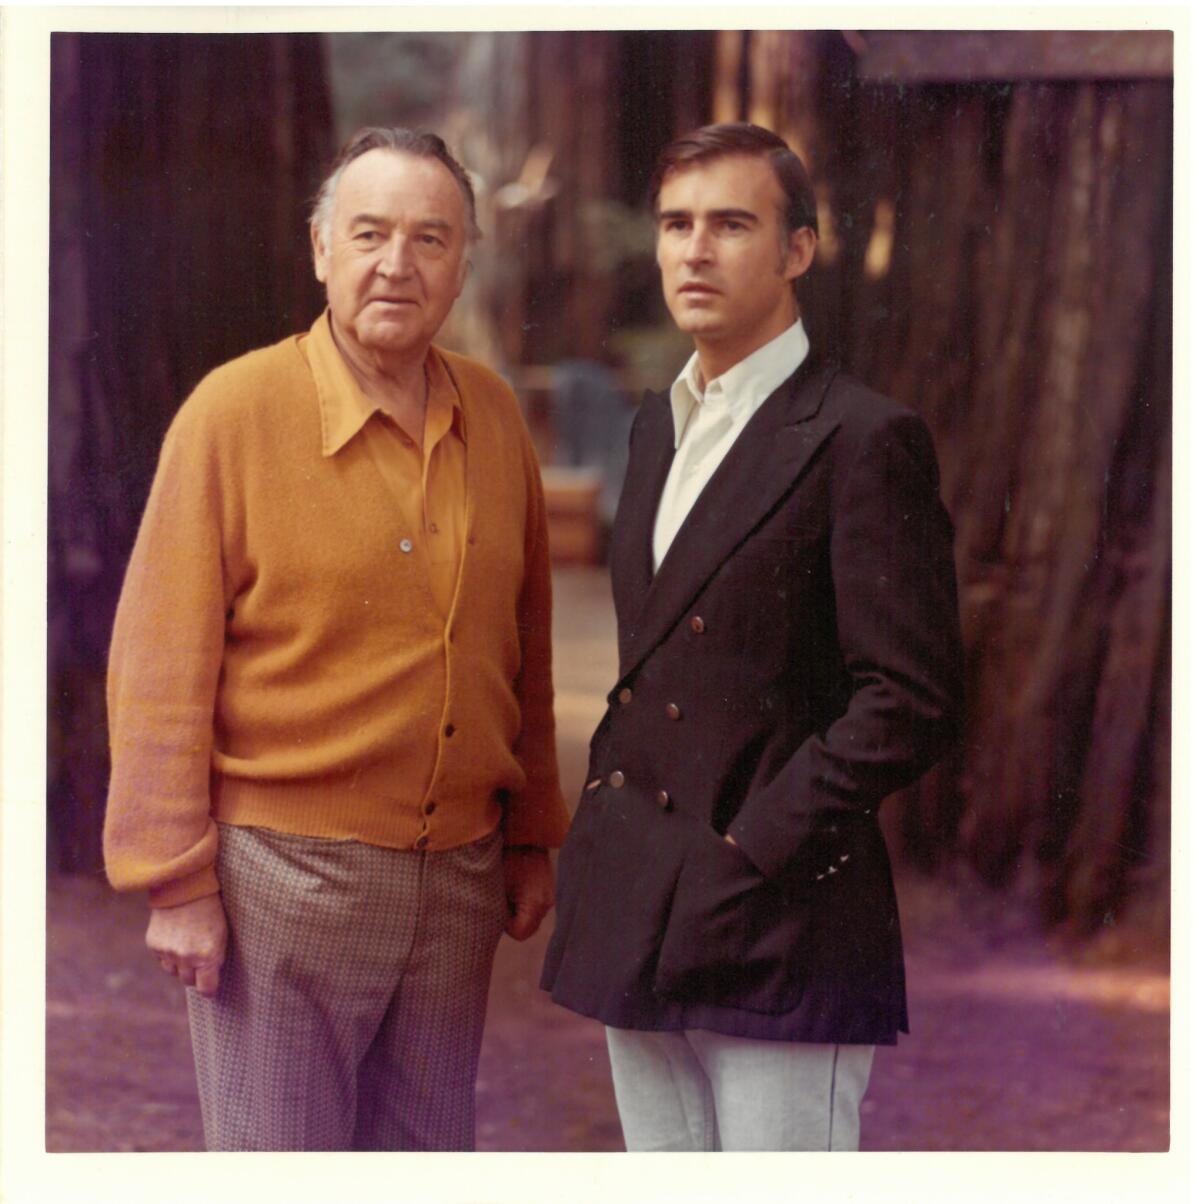 Pat Brown and Jerry Brown together in the 1970s.